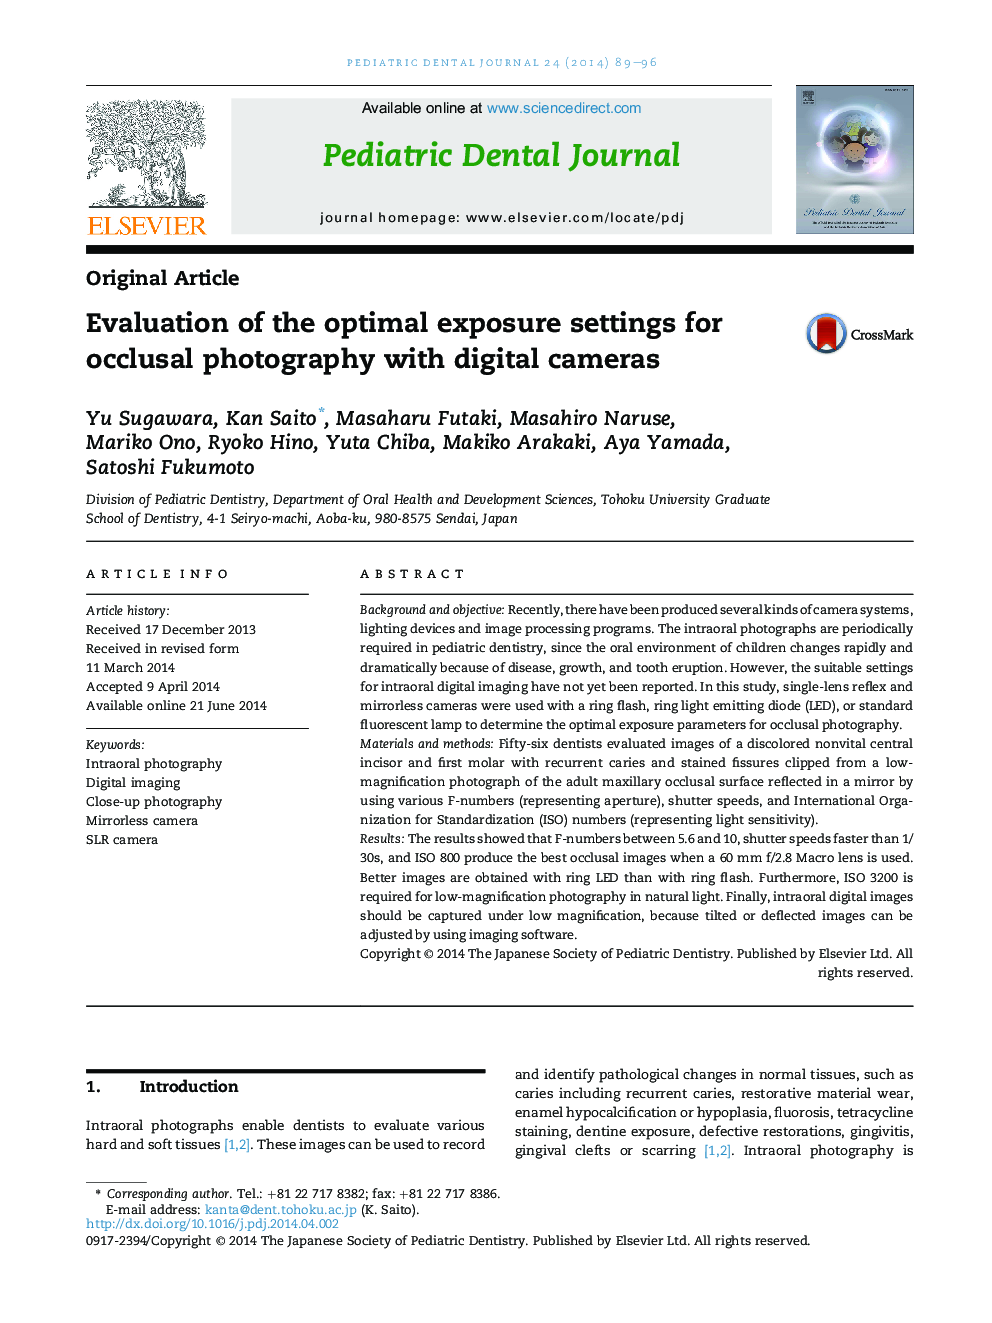 Evaluation of the optimal exposure settings for occlusal photography with digital cameras